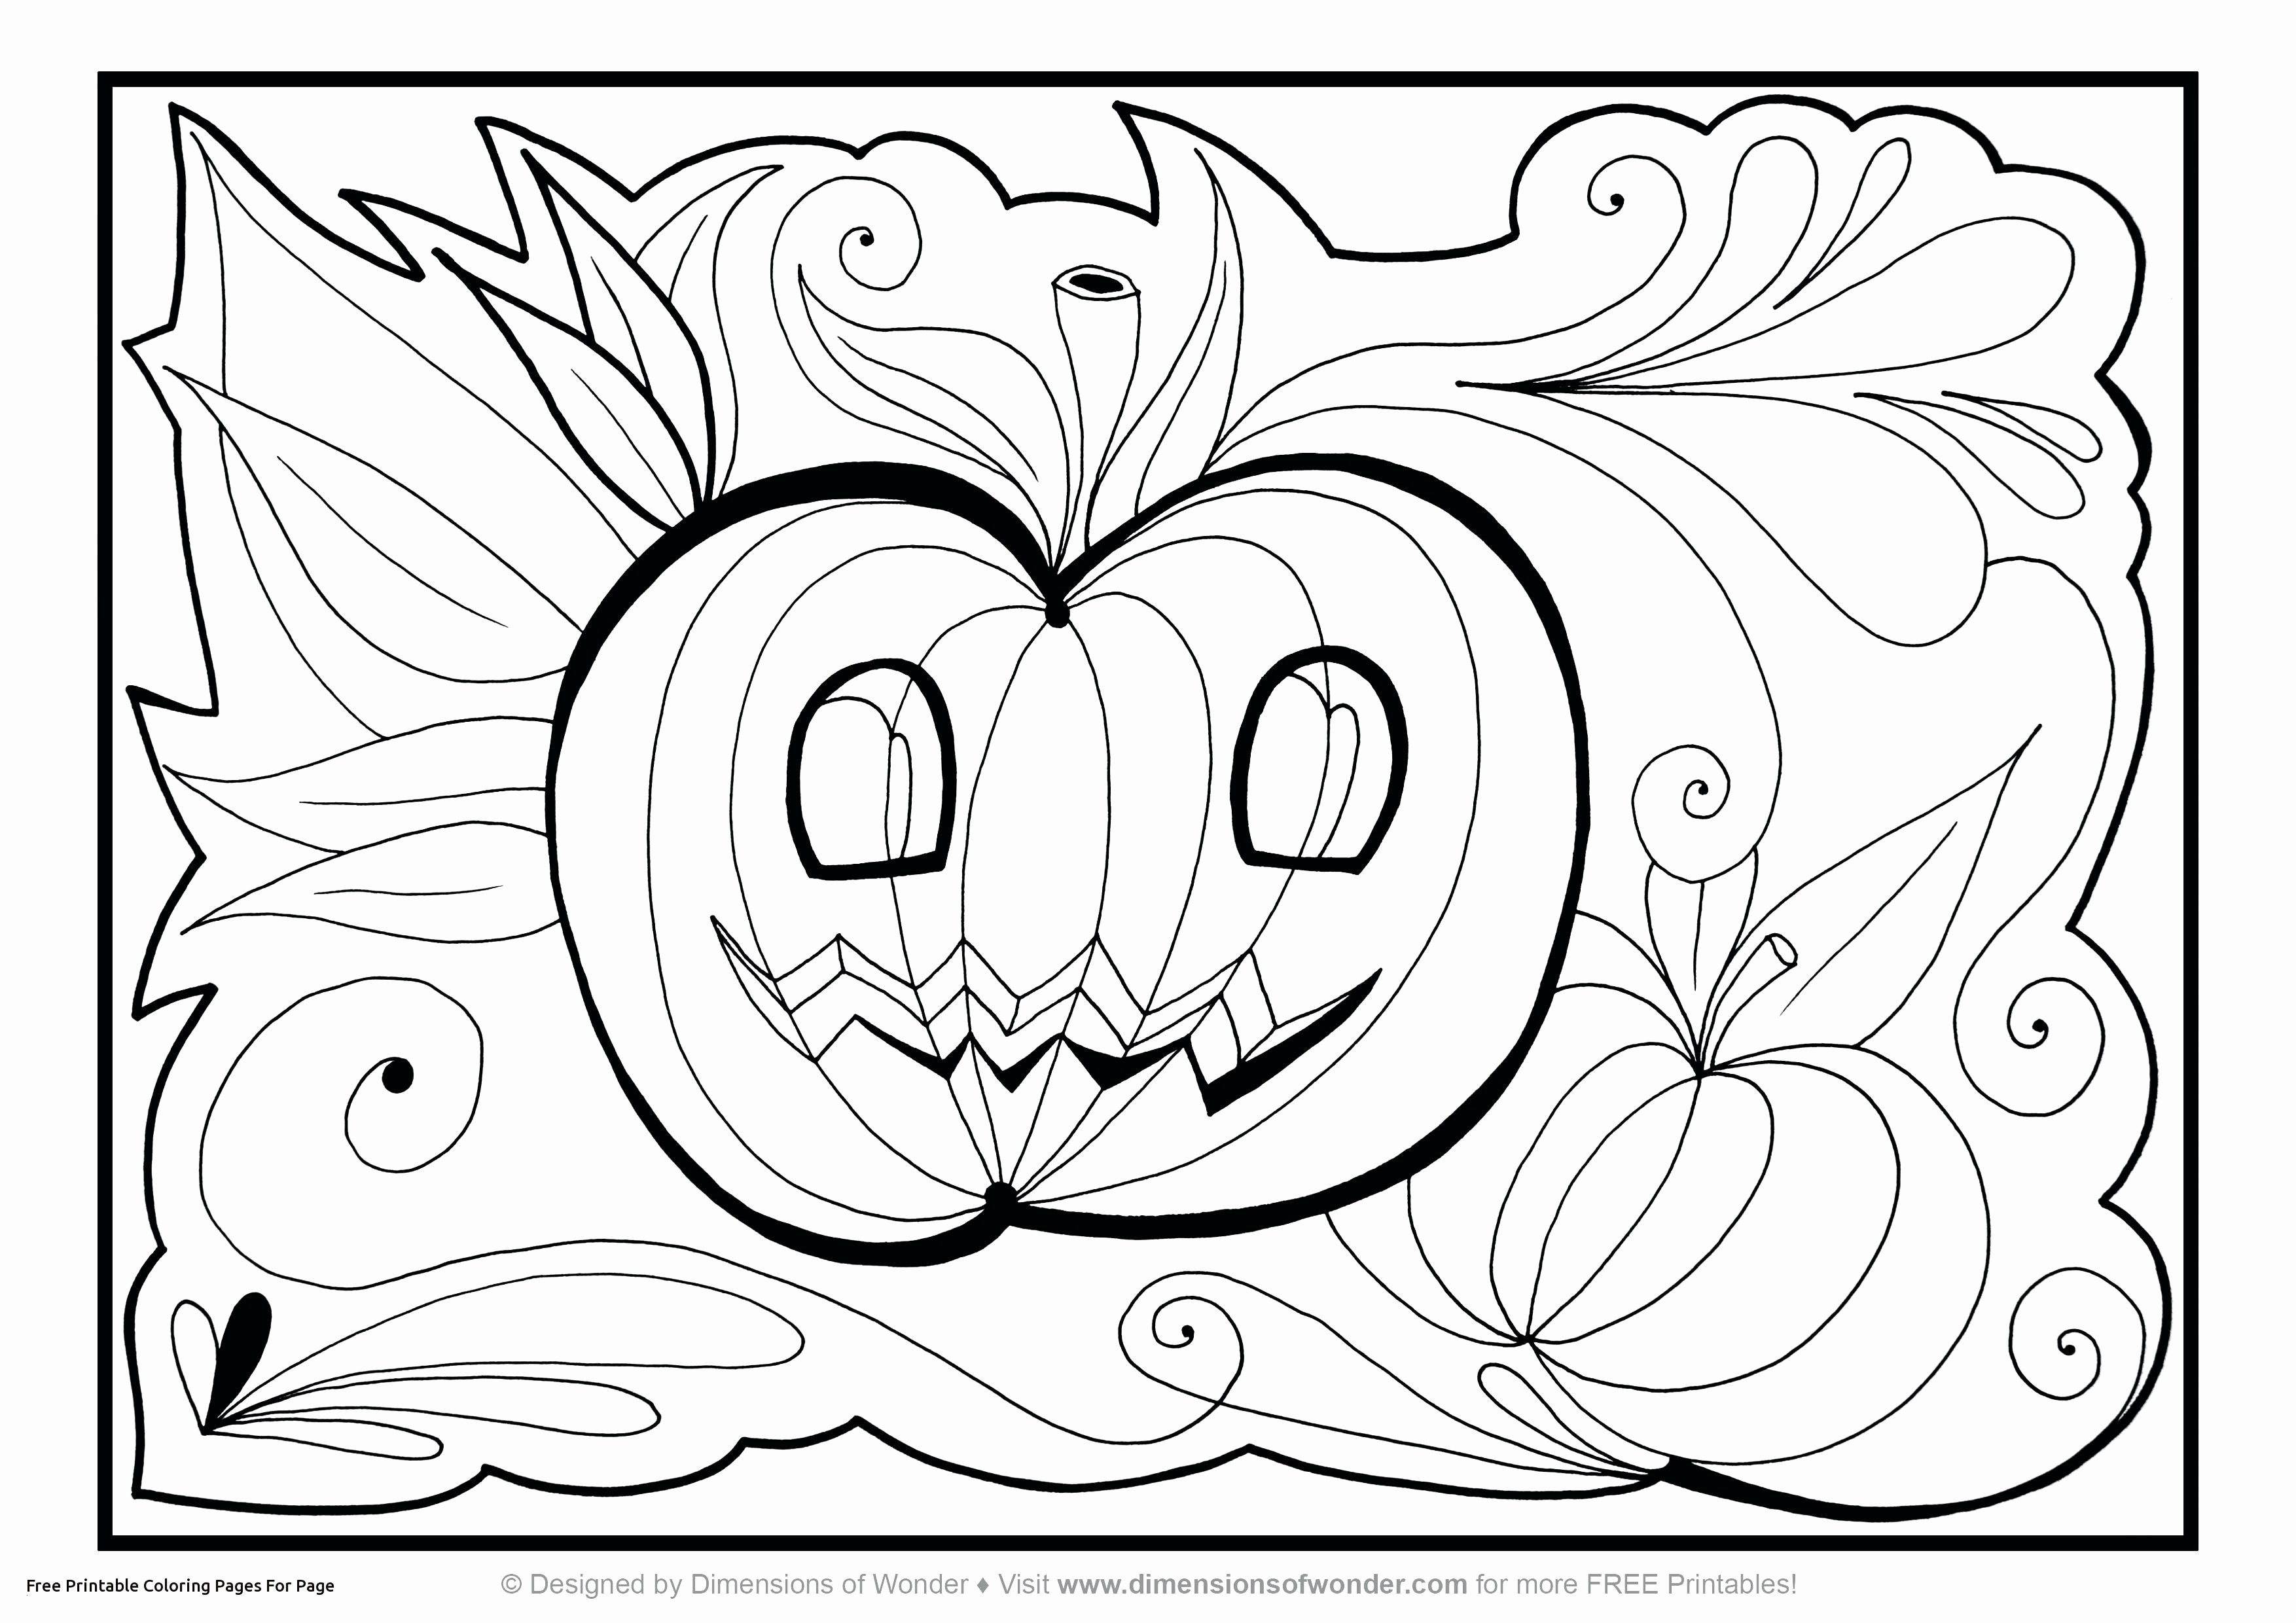 Music Notes Coloring Page Coloring Pages And Books Music Note Coloring Pages Page Ultra Free